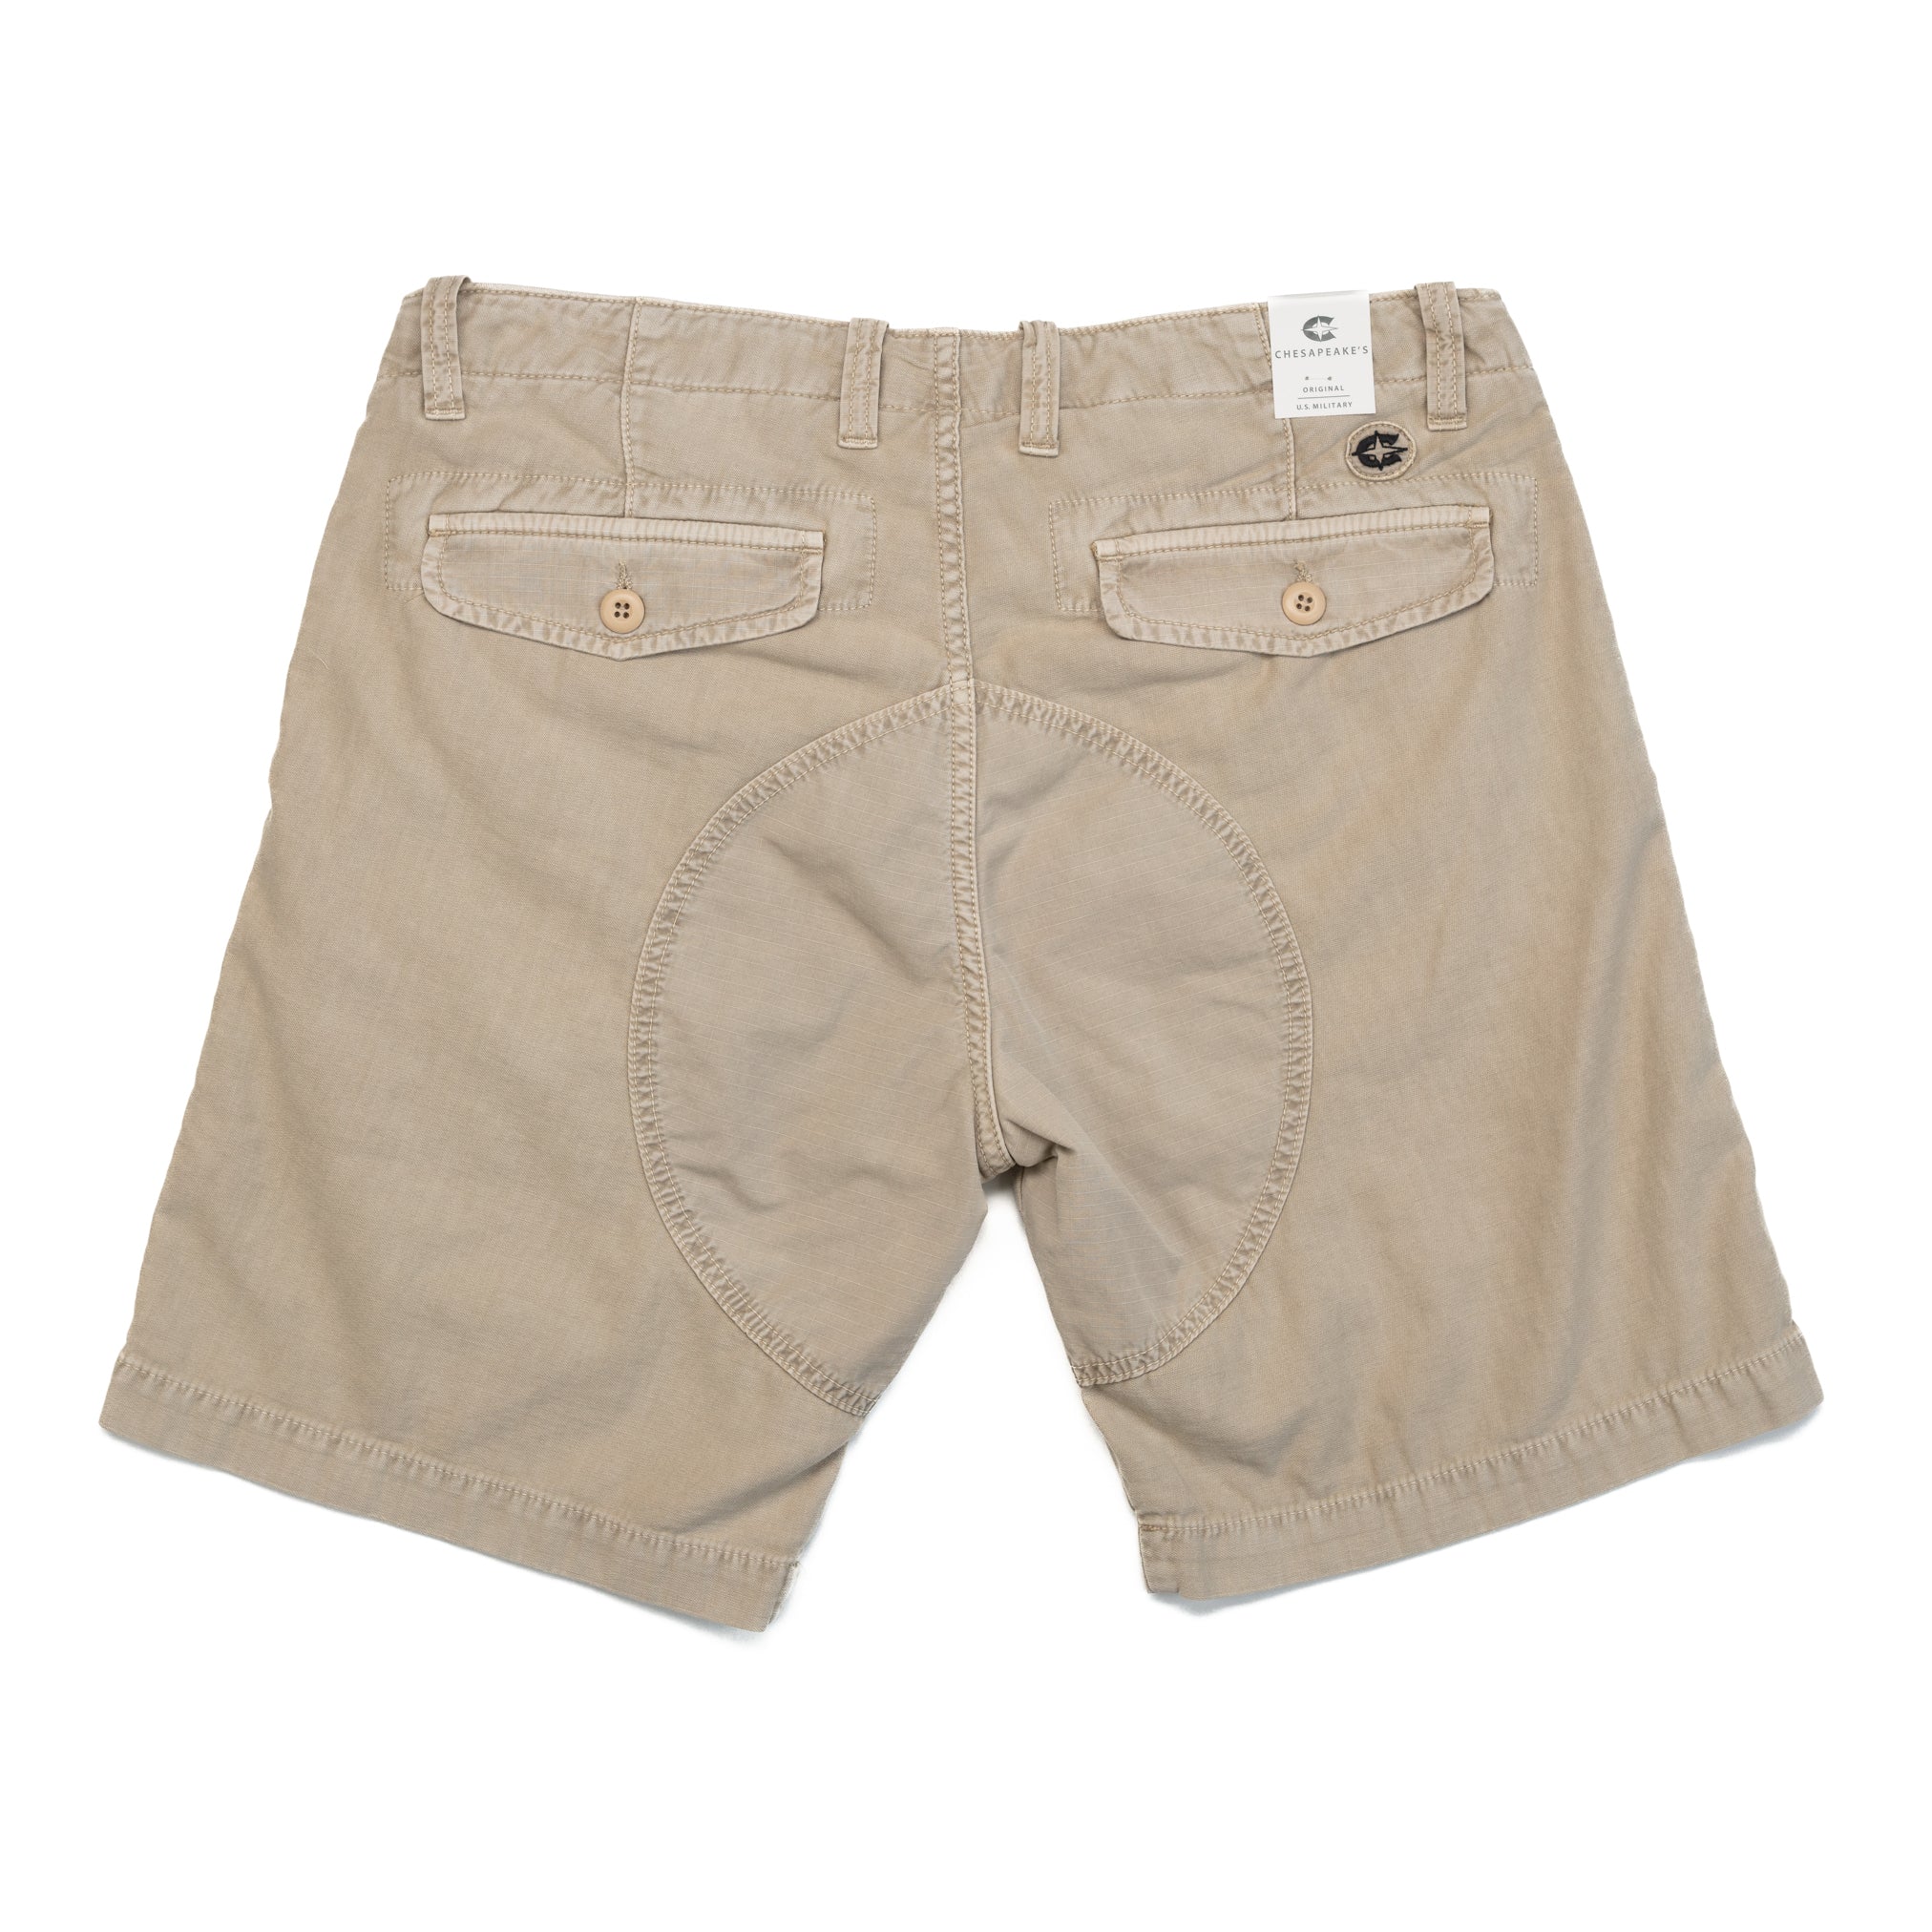 Harbour Deck Shorts in Sand